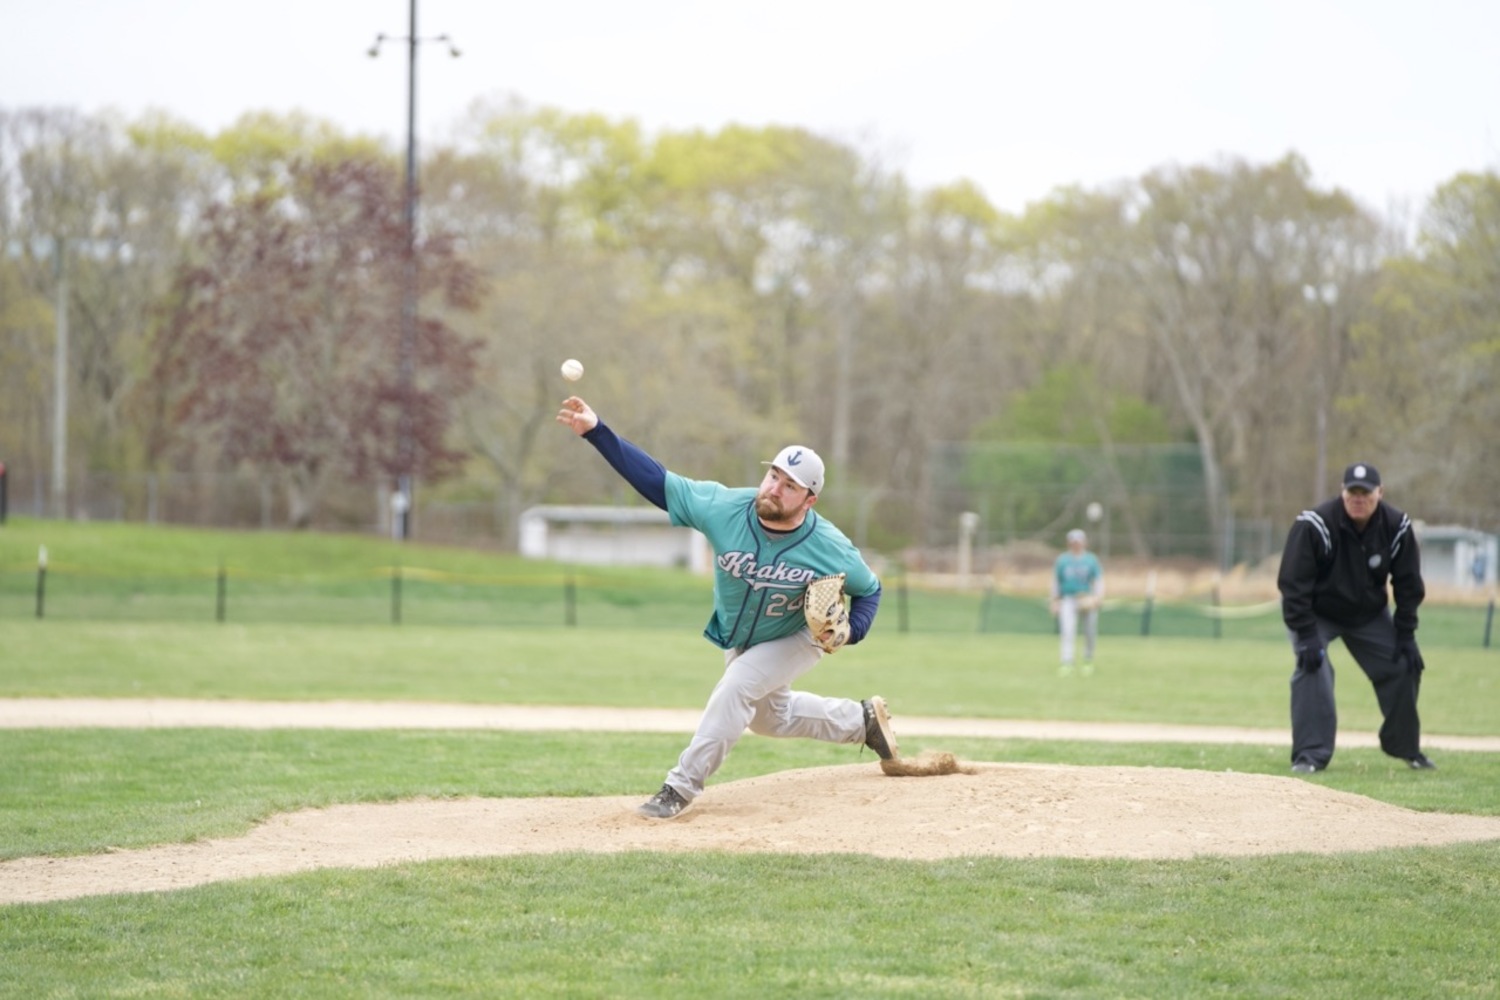 Hamptons Adult Hardball concluded its 2023 season on Sunday morning when the Harbor Kraken took on the Sag Harbor Royals in game three of the championship. The Royals won, 8-6.   HAMPTONS ADULT HARDBALL